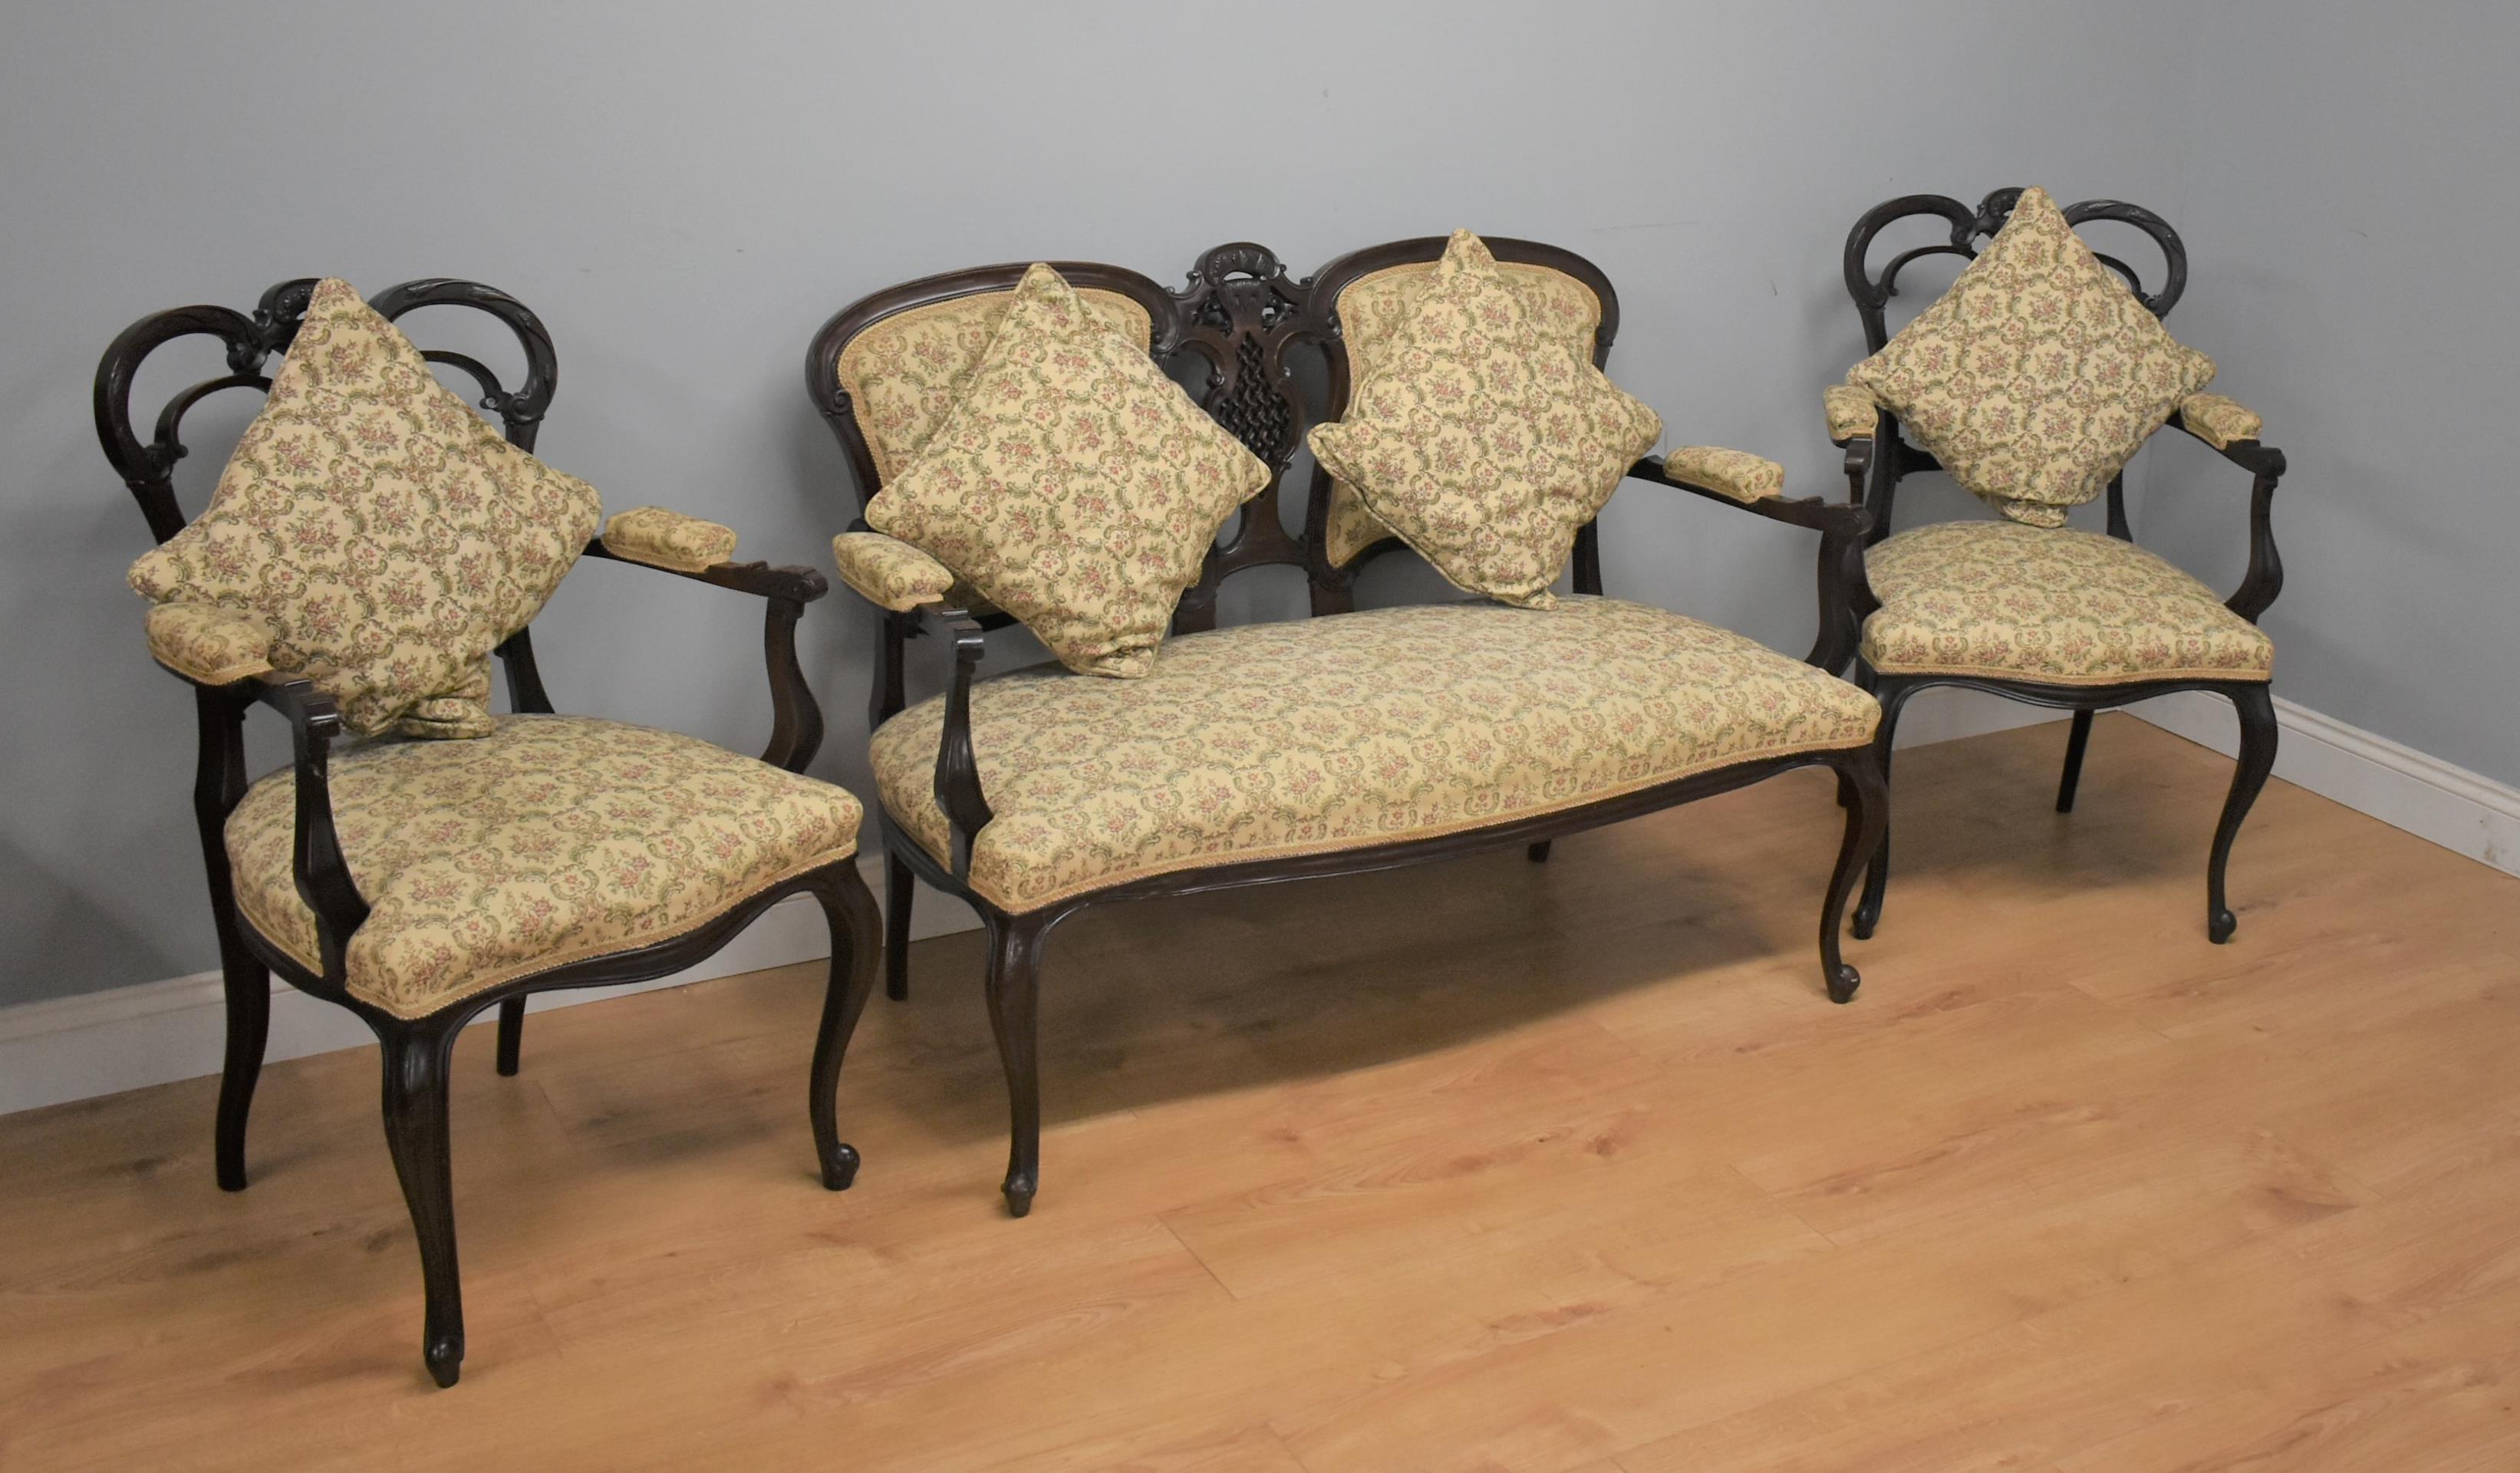 three piece suites for sale